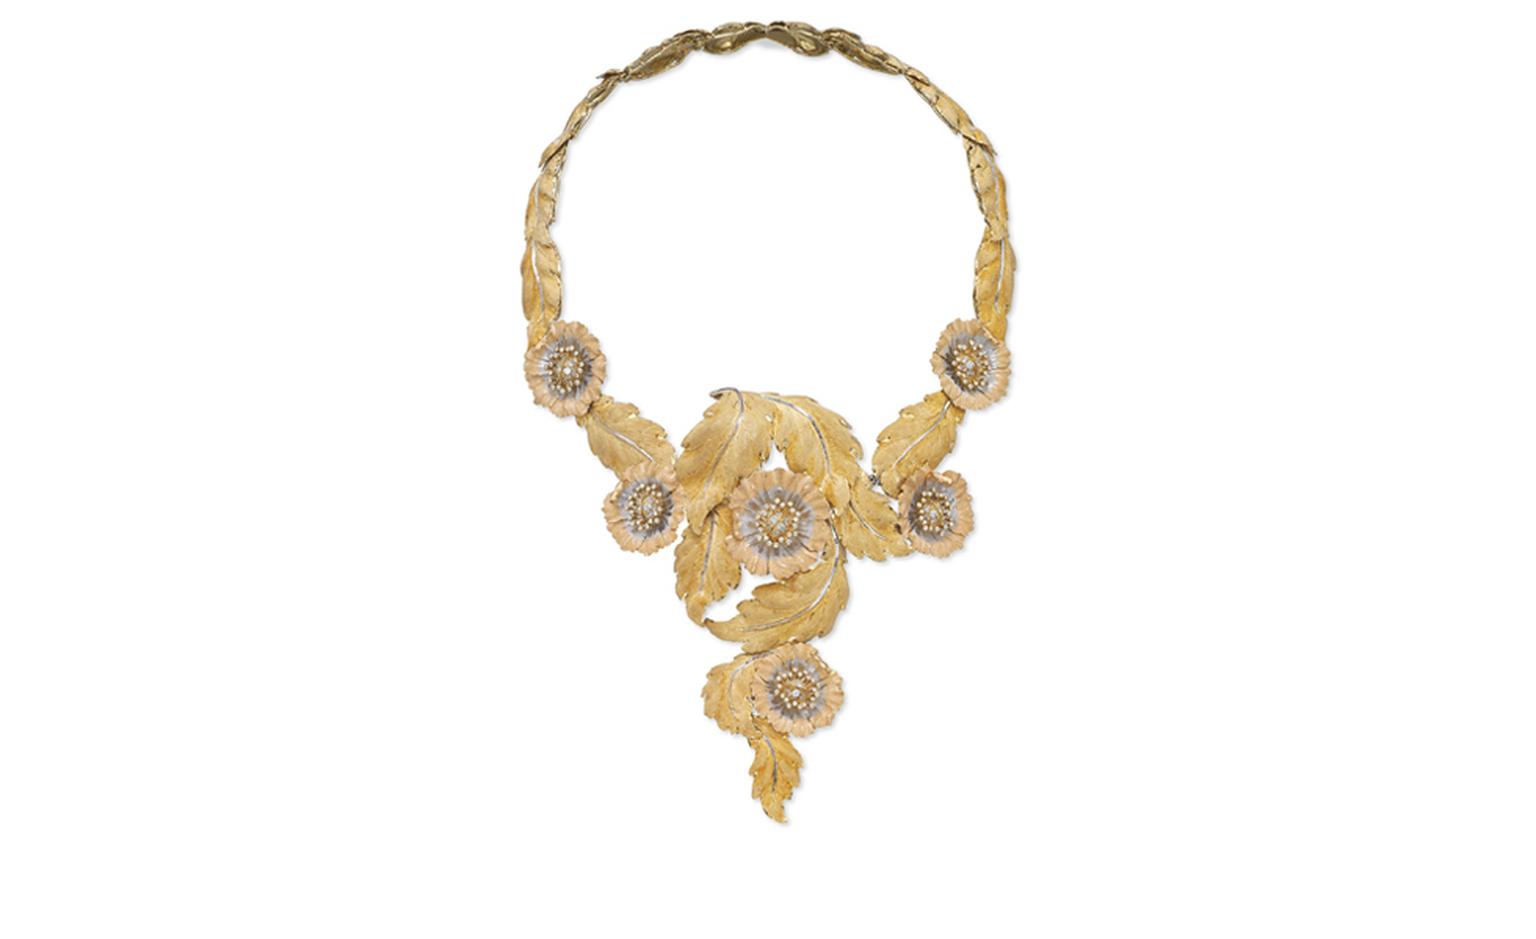 Lot 161. The 'Grand Collier Printemps', By Buccellati. Of V-shape design, with textured three colour gold leaves and flowerheads, each centering upon diamond-set pistils. Estimate  CHF 45,000 - CHF 55,000 SOLD FOR CHF 56,250